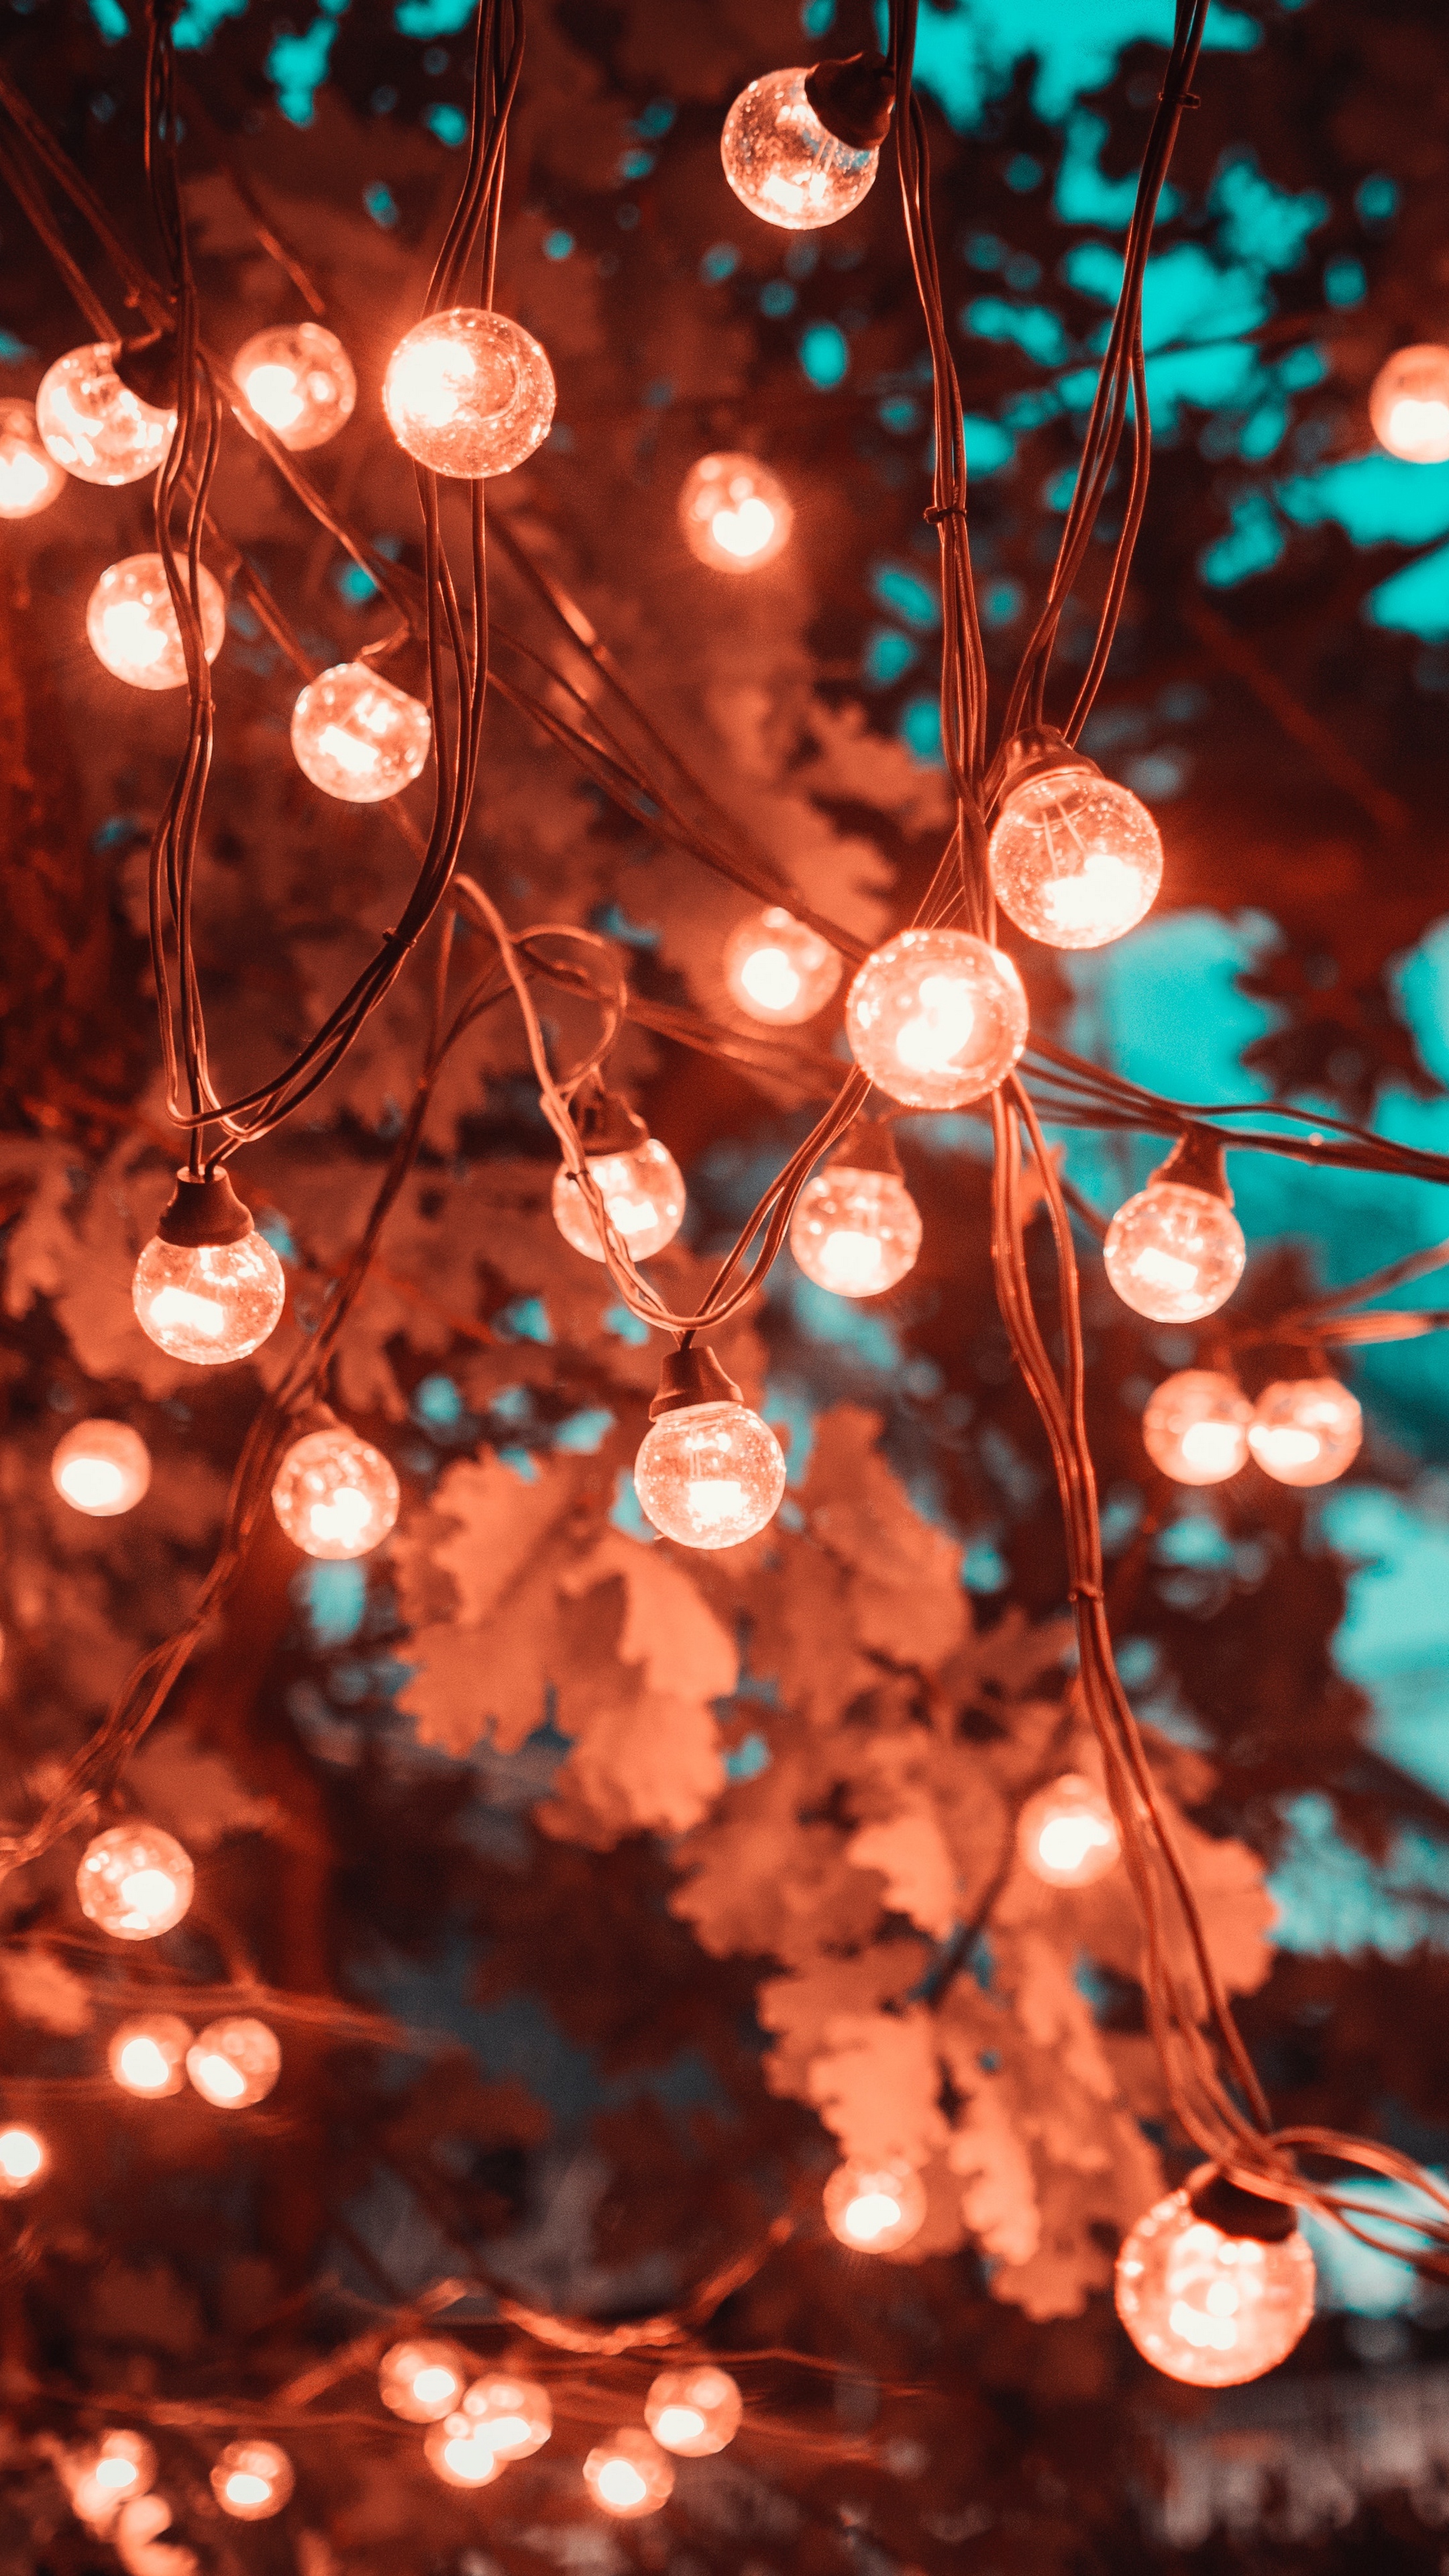 Image: Lamps, wires, light, leaves, branches